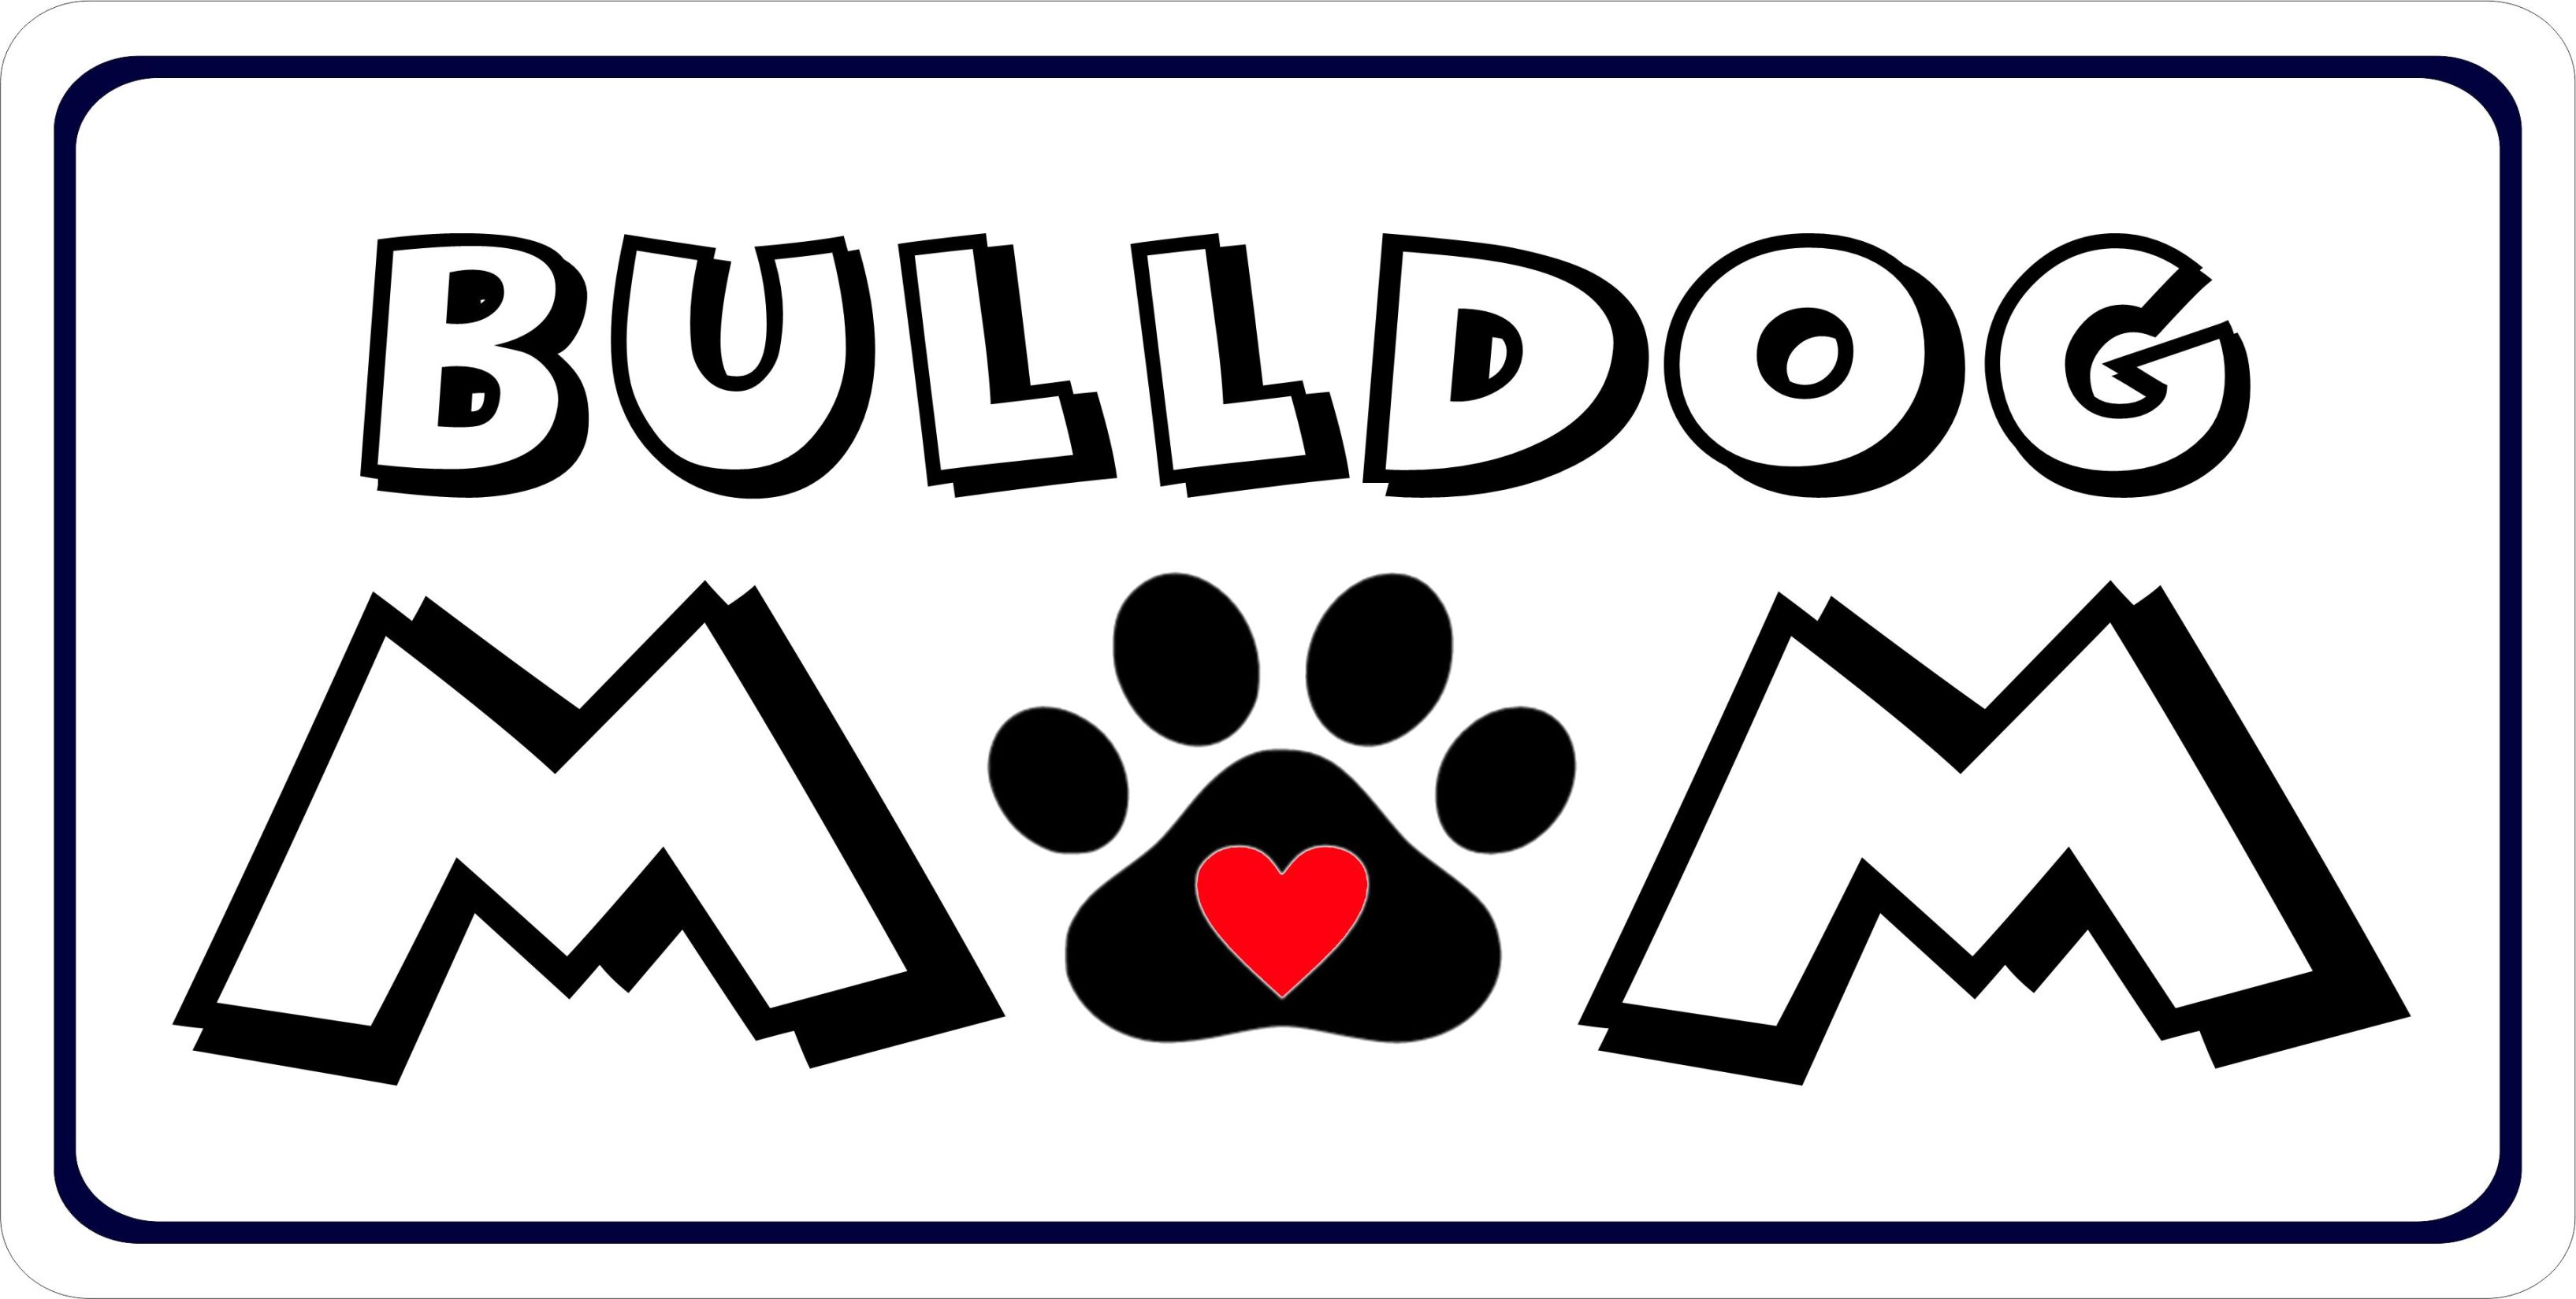 BULLDOG MOM Mothers Steel Auto SUV License Plate Frame CAN PERSONALIZE